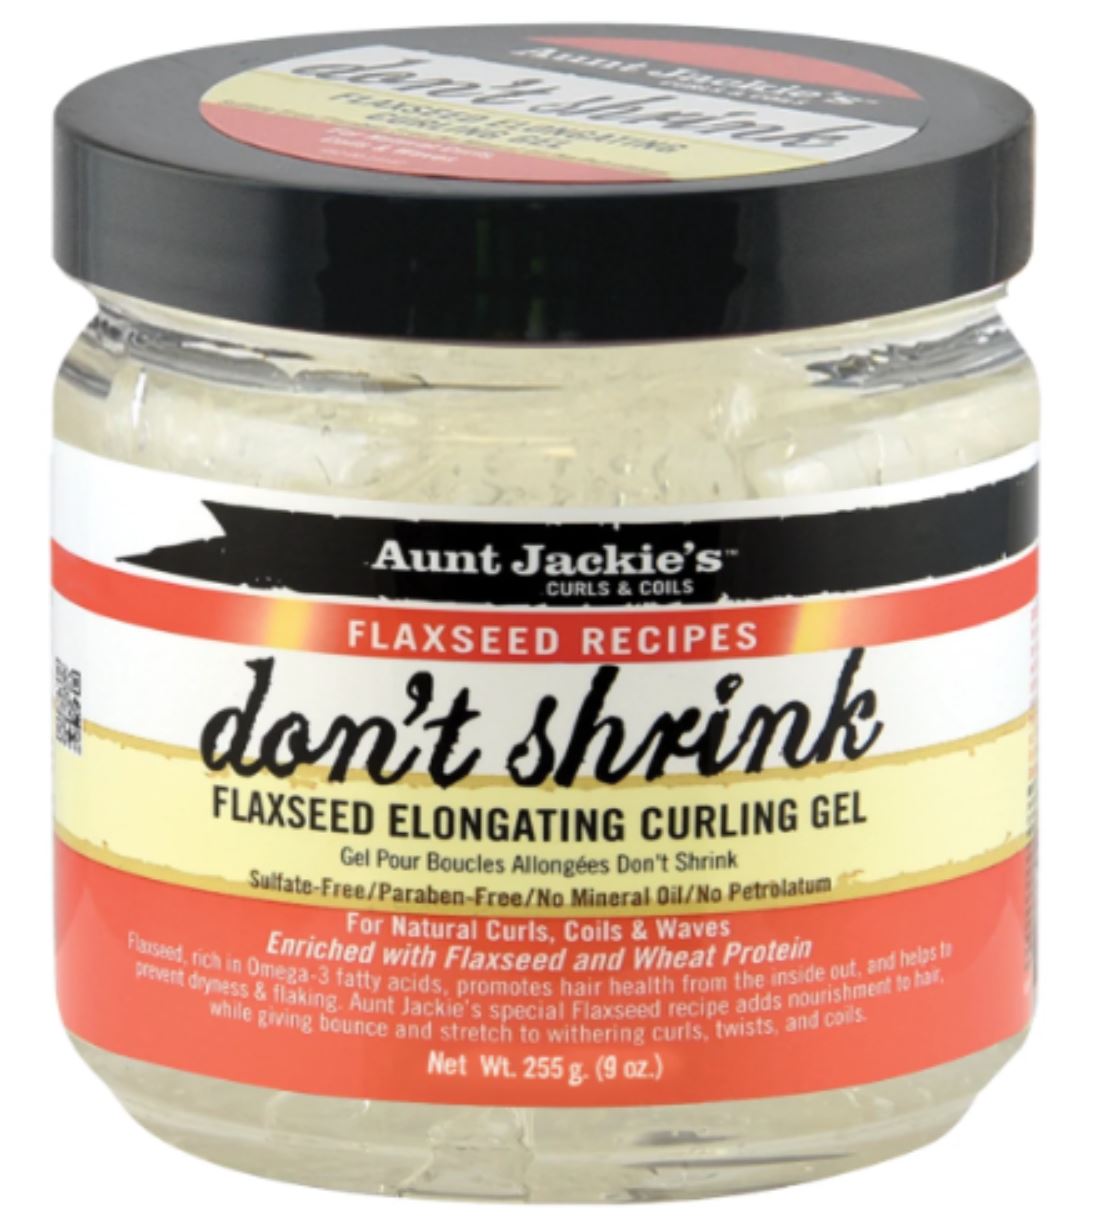 Aunt Jackie's Flax Don't Shrink Gel